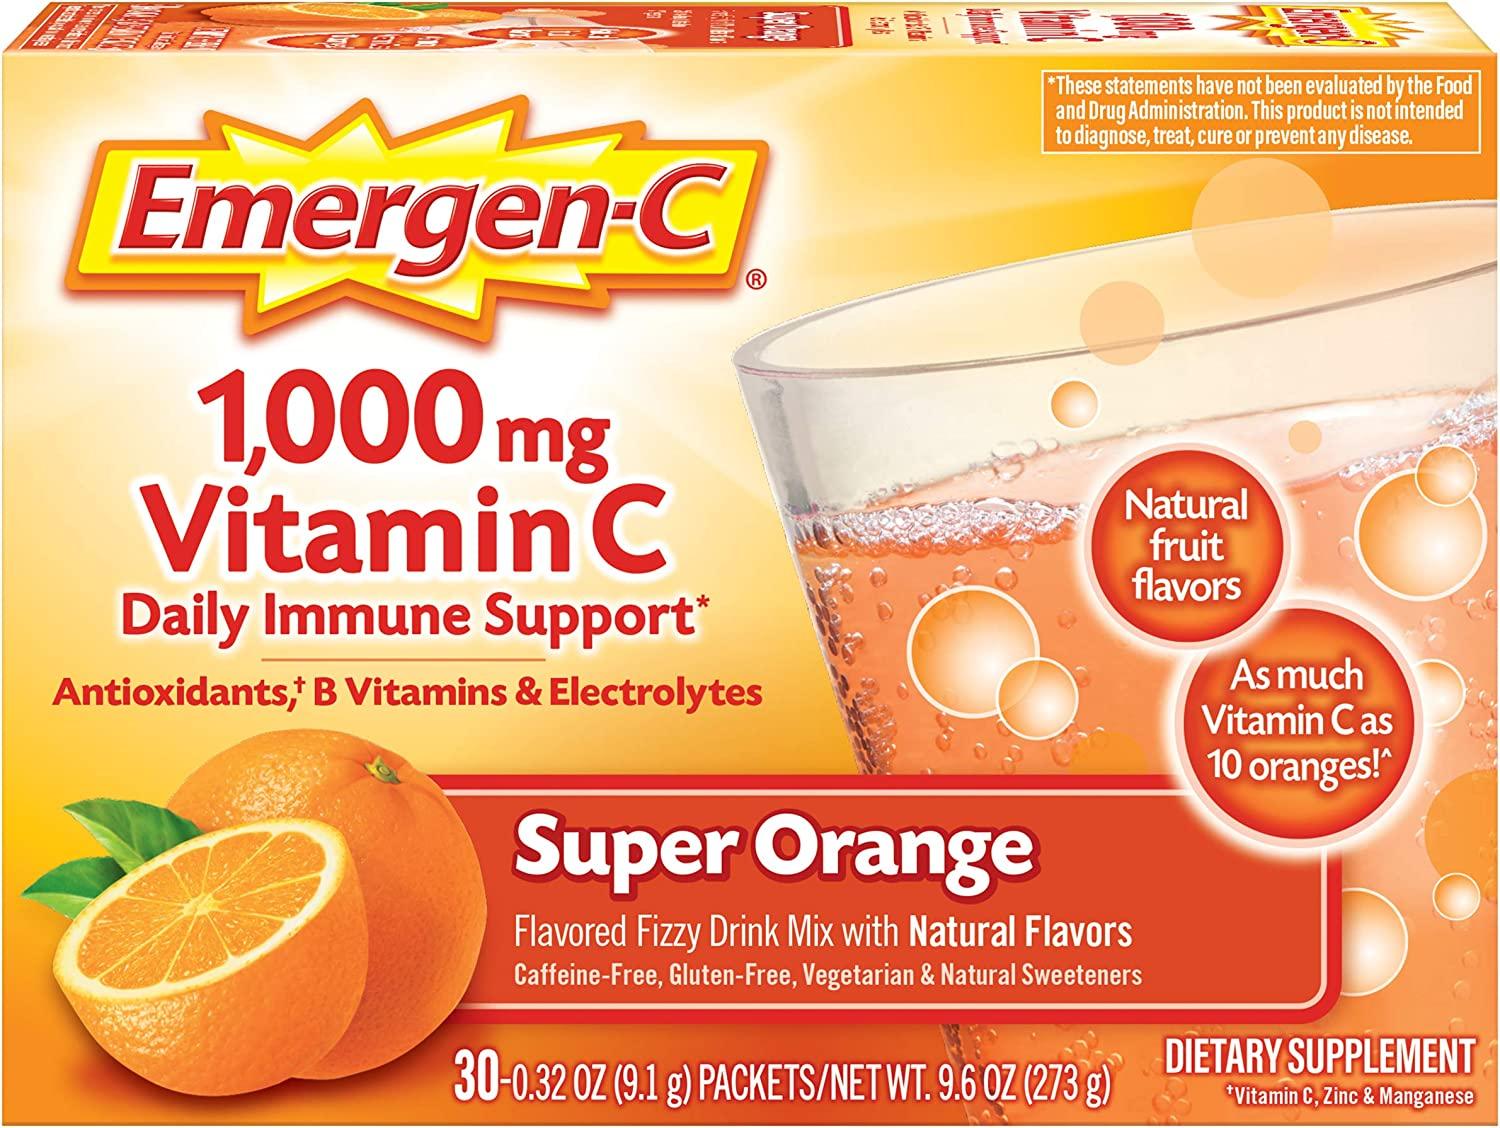 Emergen-C 1000mg Vitamin C Powder Packets for $4.44 Shipped